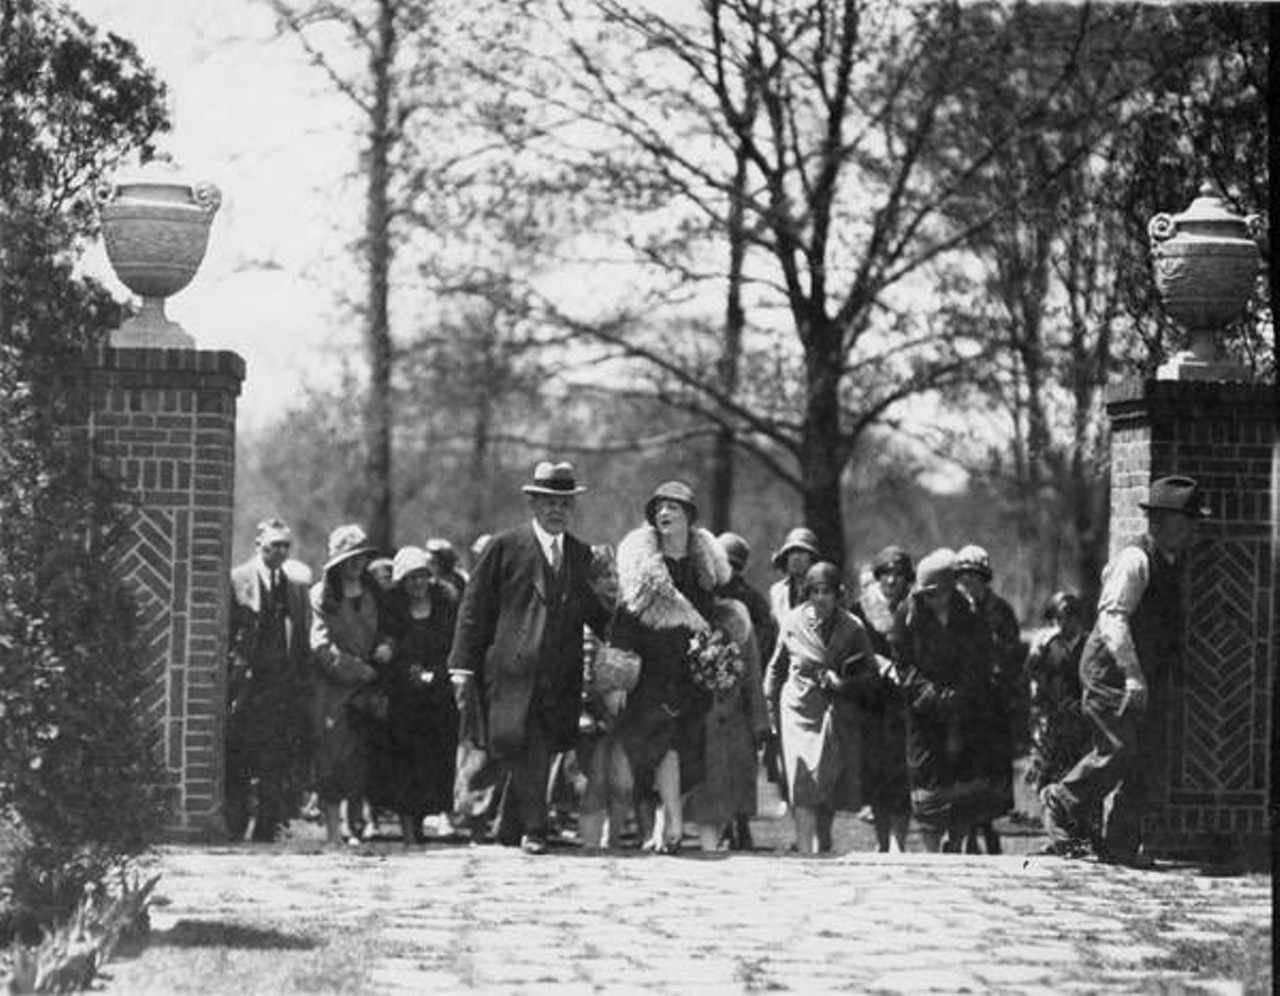 City Manager Hopkins and Ethel Barrymore entering gate at Shakespeare Gardens. c. 1926